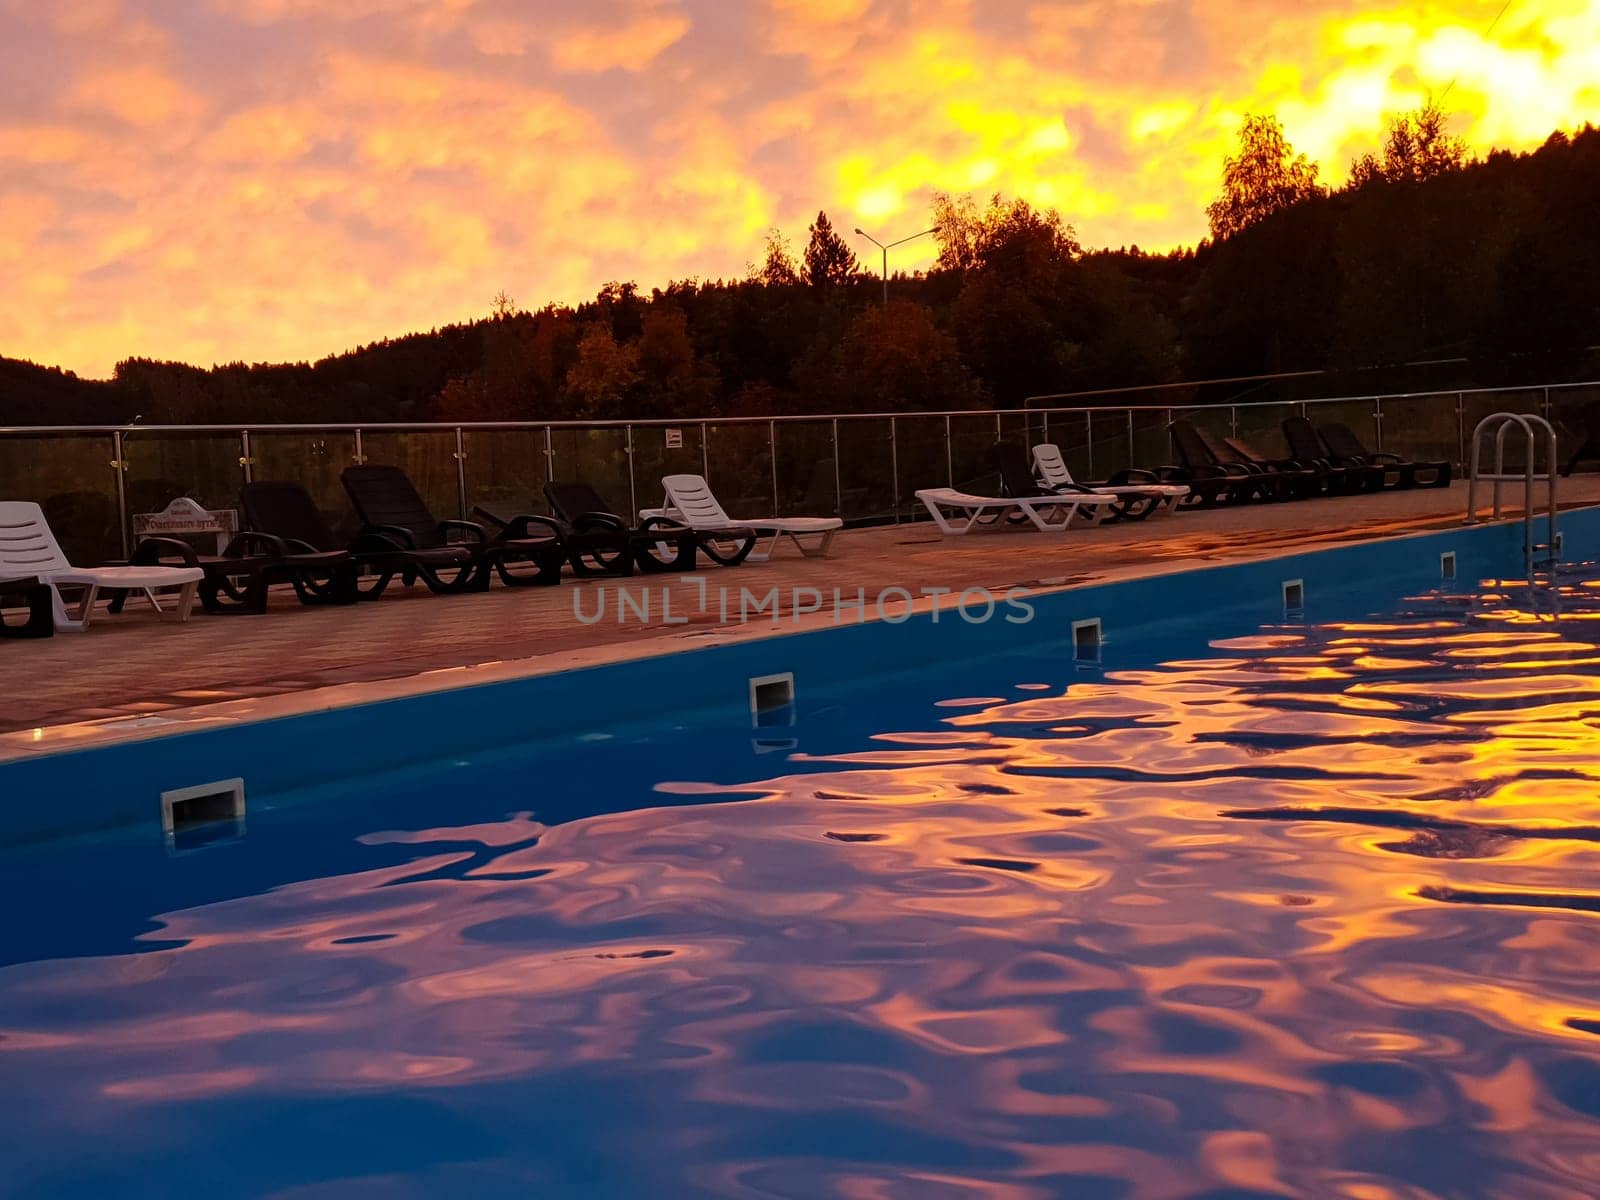 Swimming pool with sun loungers at sunset by Spirina